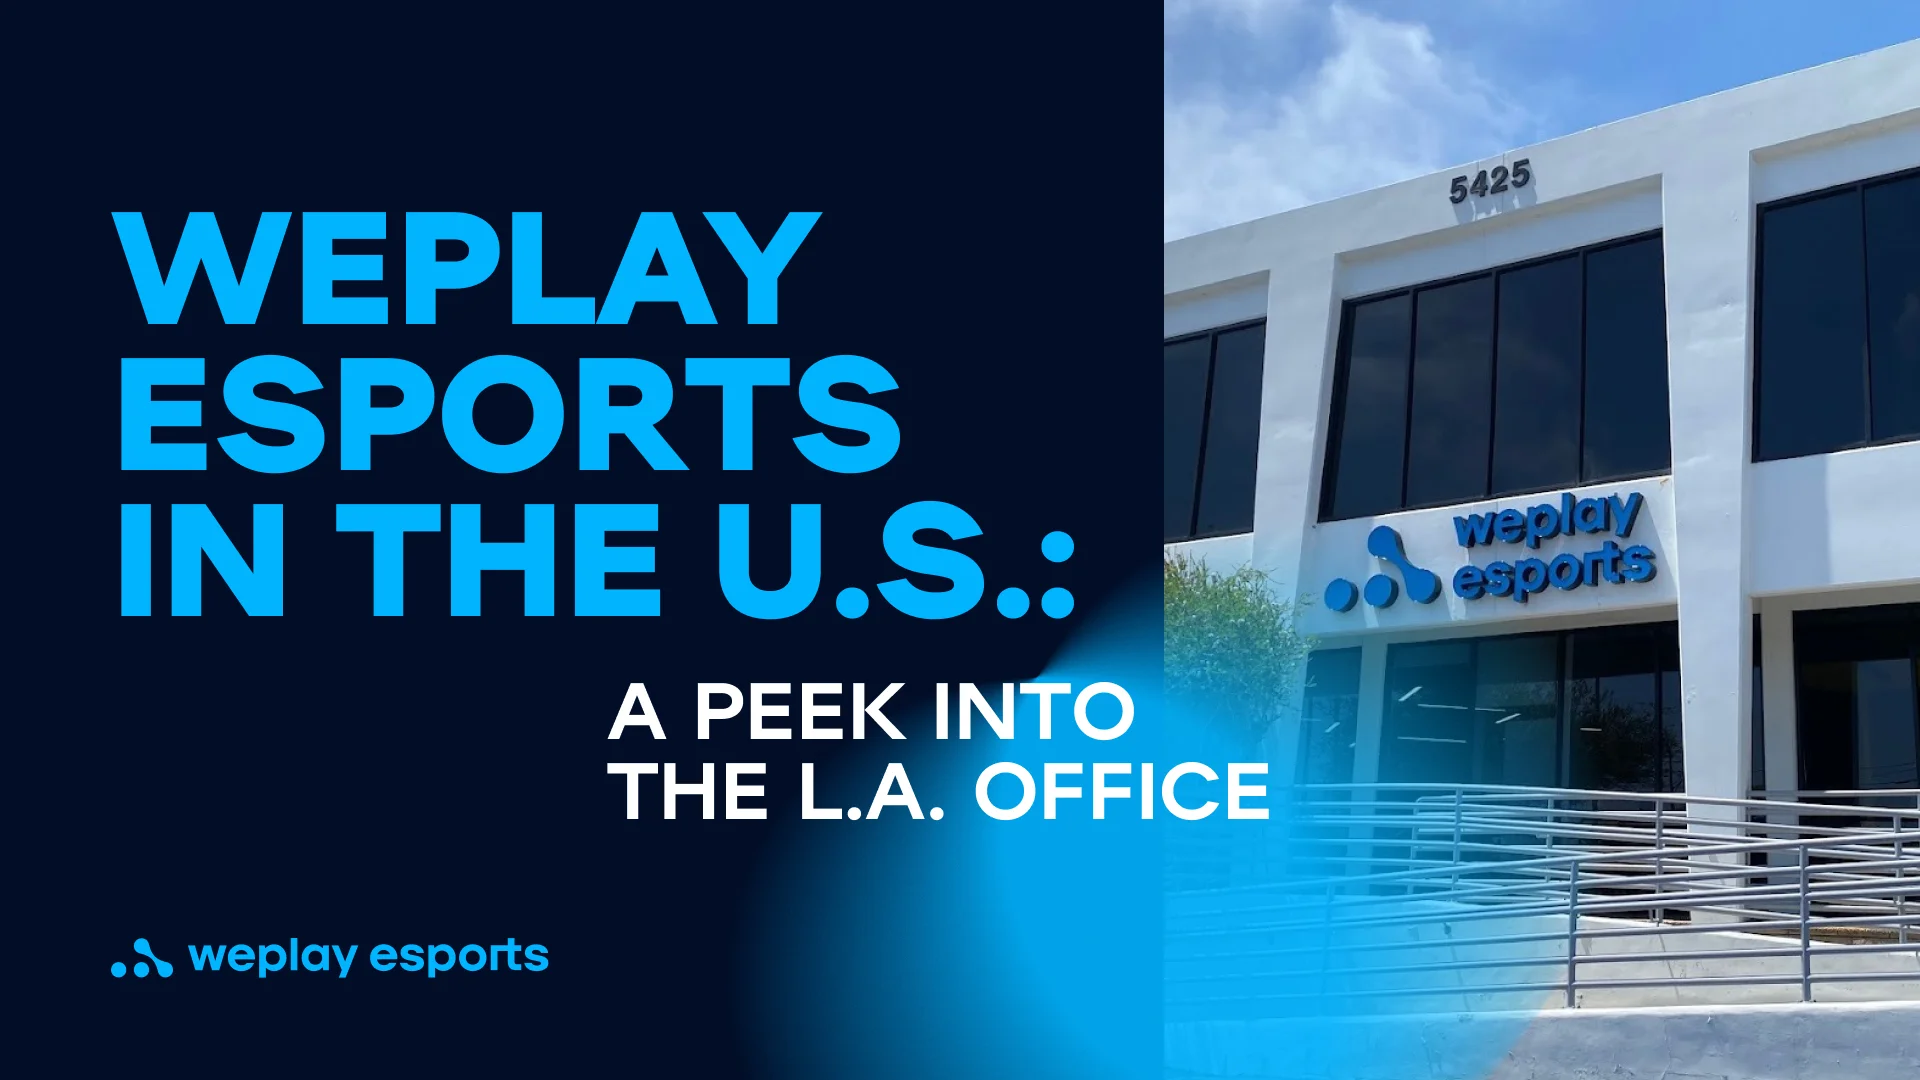 WePlay Esports Expands into the U.S. Market A Peek into the Los Angeles Office. Credit: WePlay Holding